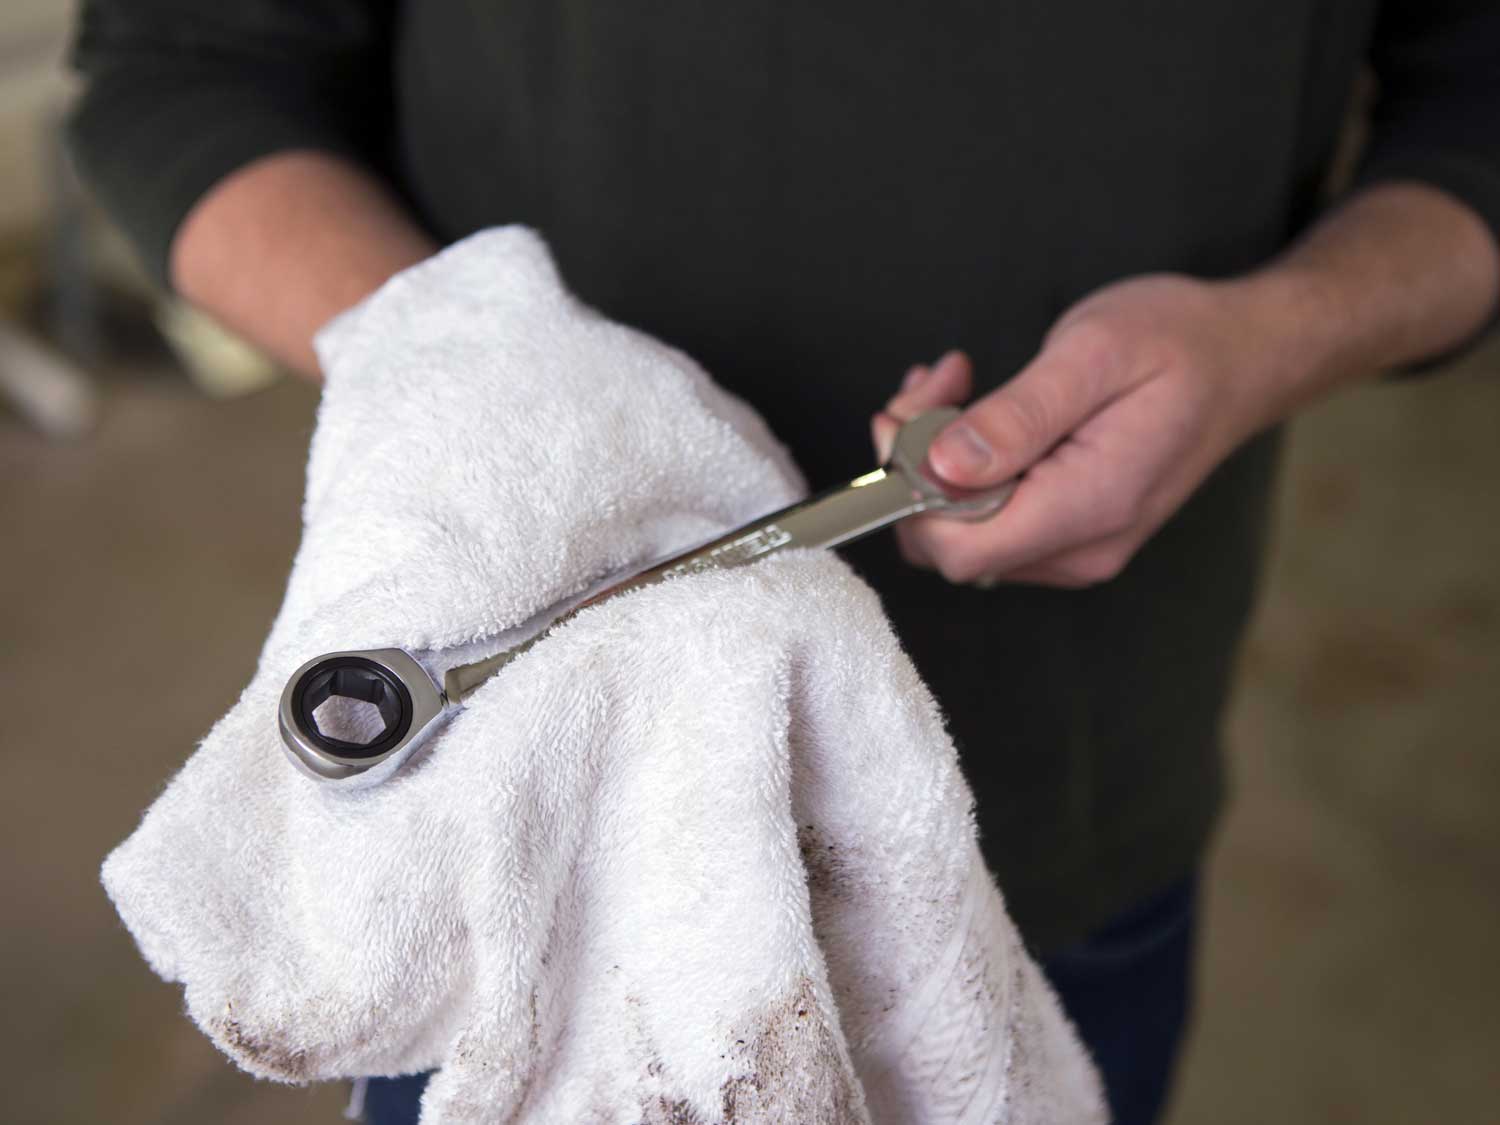 Cleaning wrench with towel.